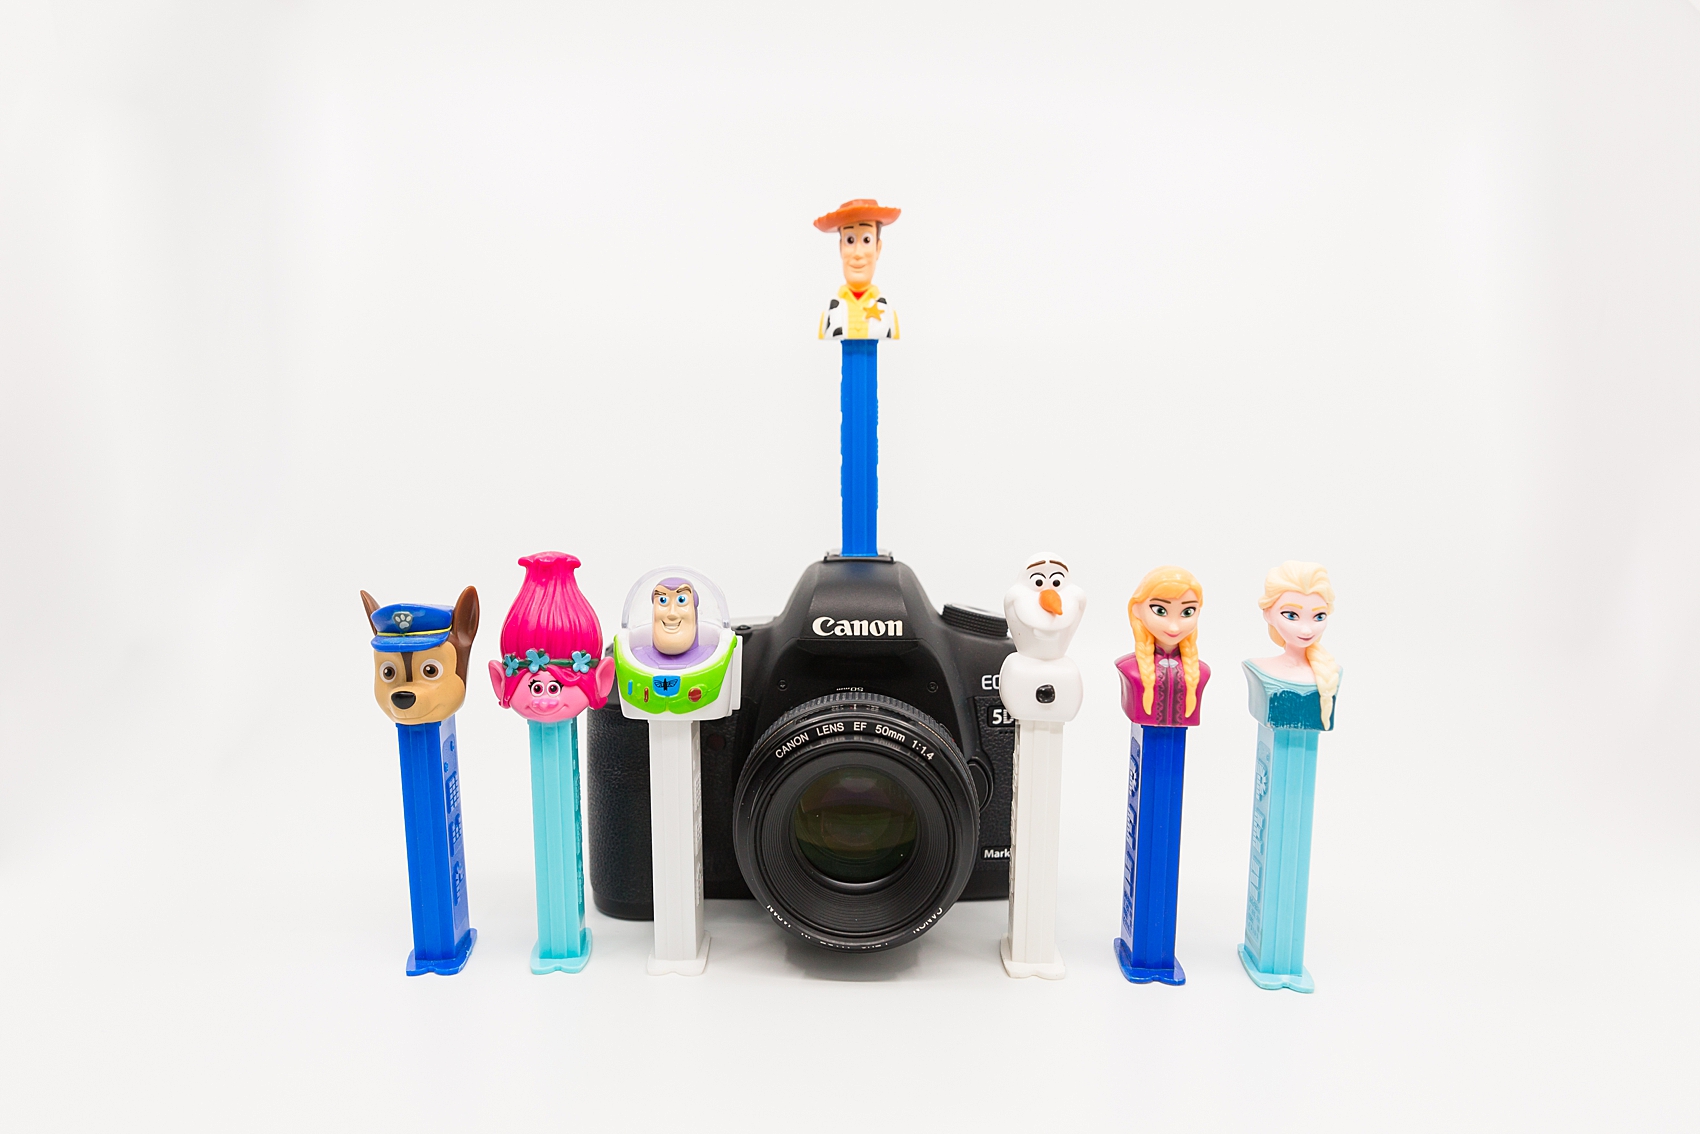 Leah Hope Photography | Photographer Resources | For Photographers | Photography Advice | Pez Dispensers | Tips for Photographers | Learn Photography